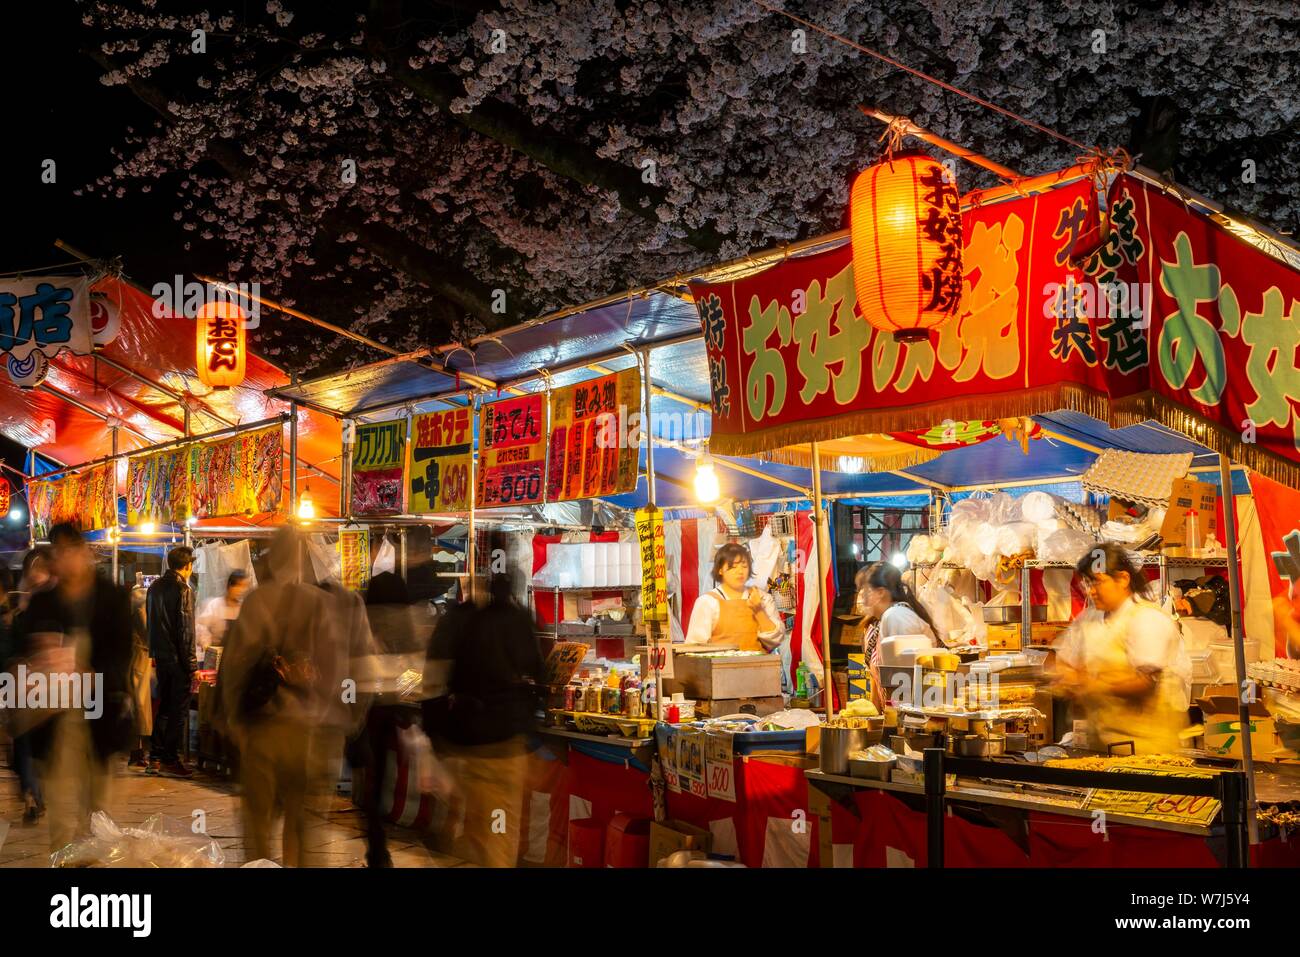 Food stalls with Japanese food at night, cherry blossom in spring, Hanami Fest, Ueno Park, Taito City, Tokyo, Japan Stock Photo